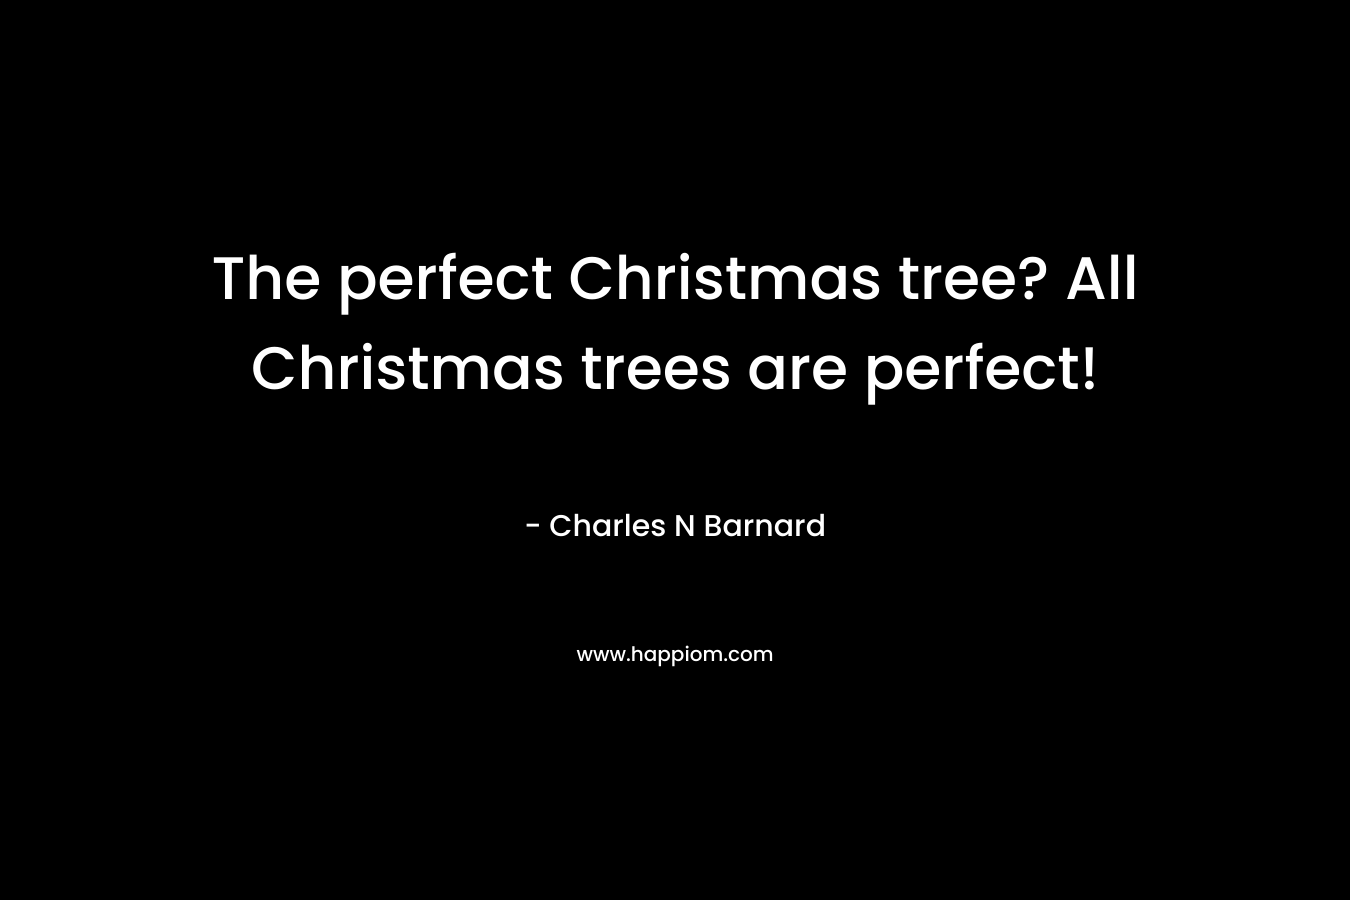 The perfect Christmas tree? All Christmas trees are perfect!